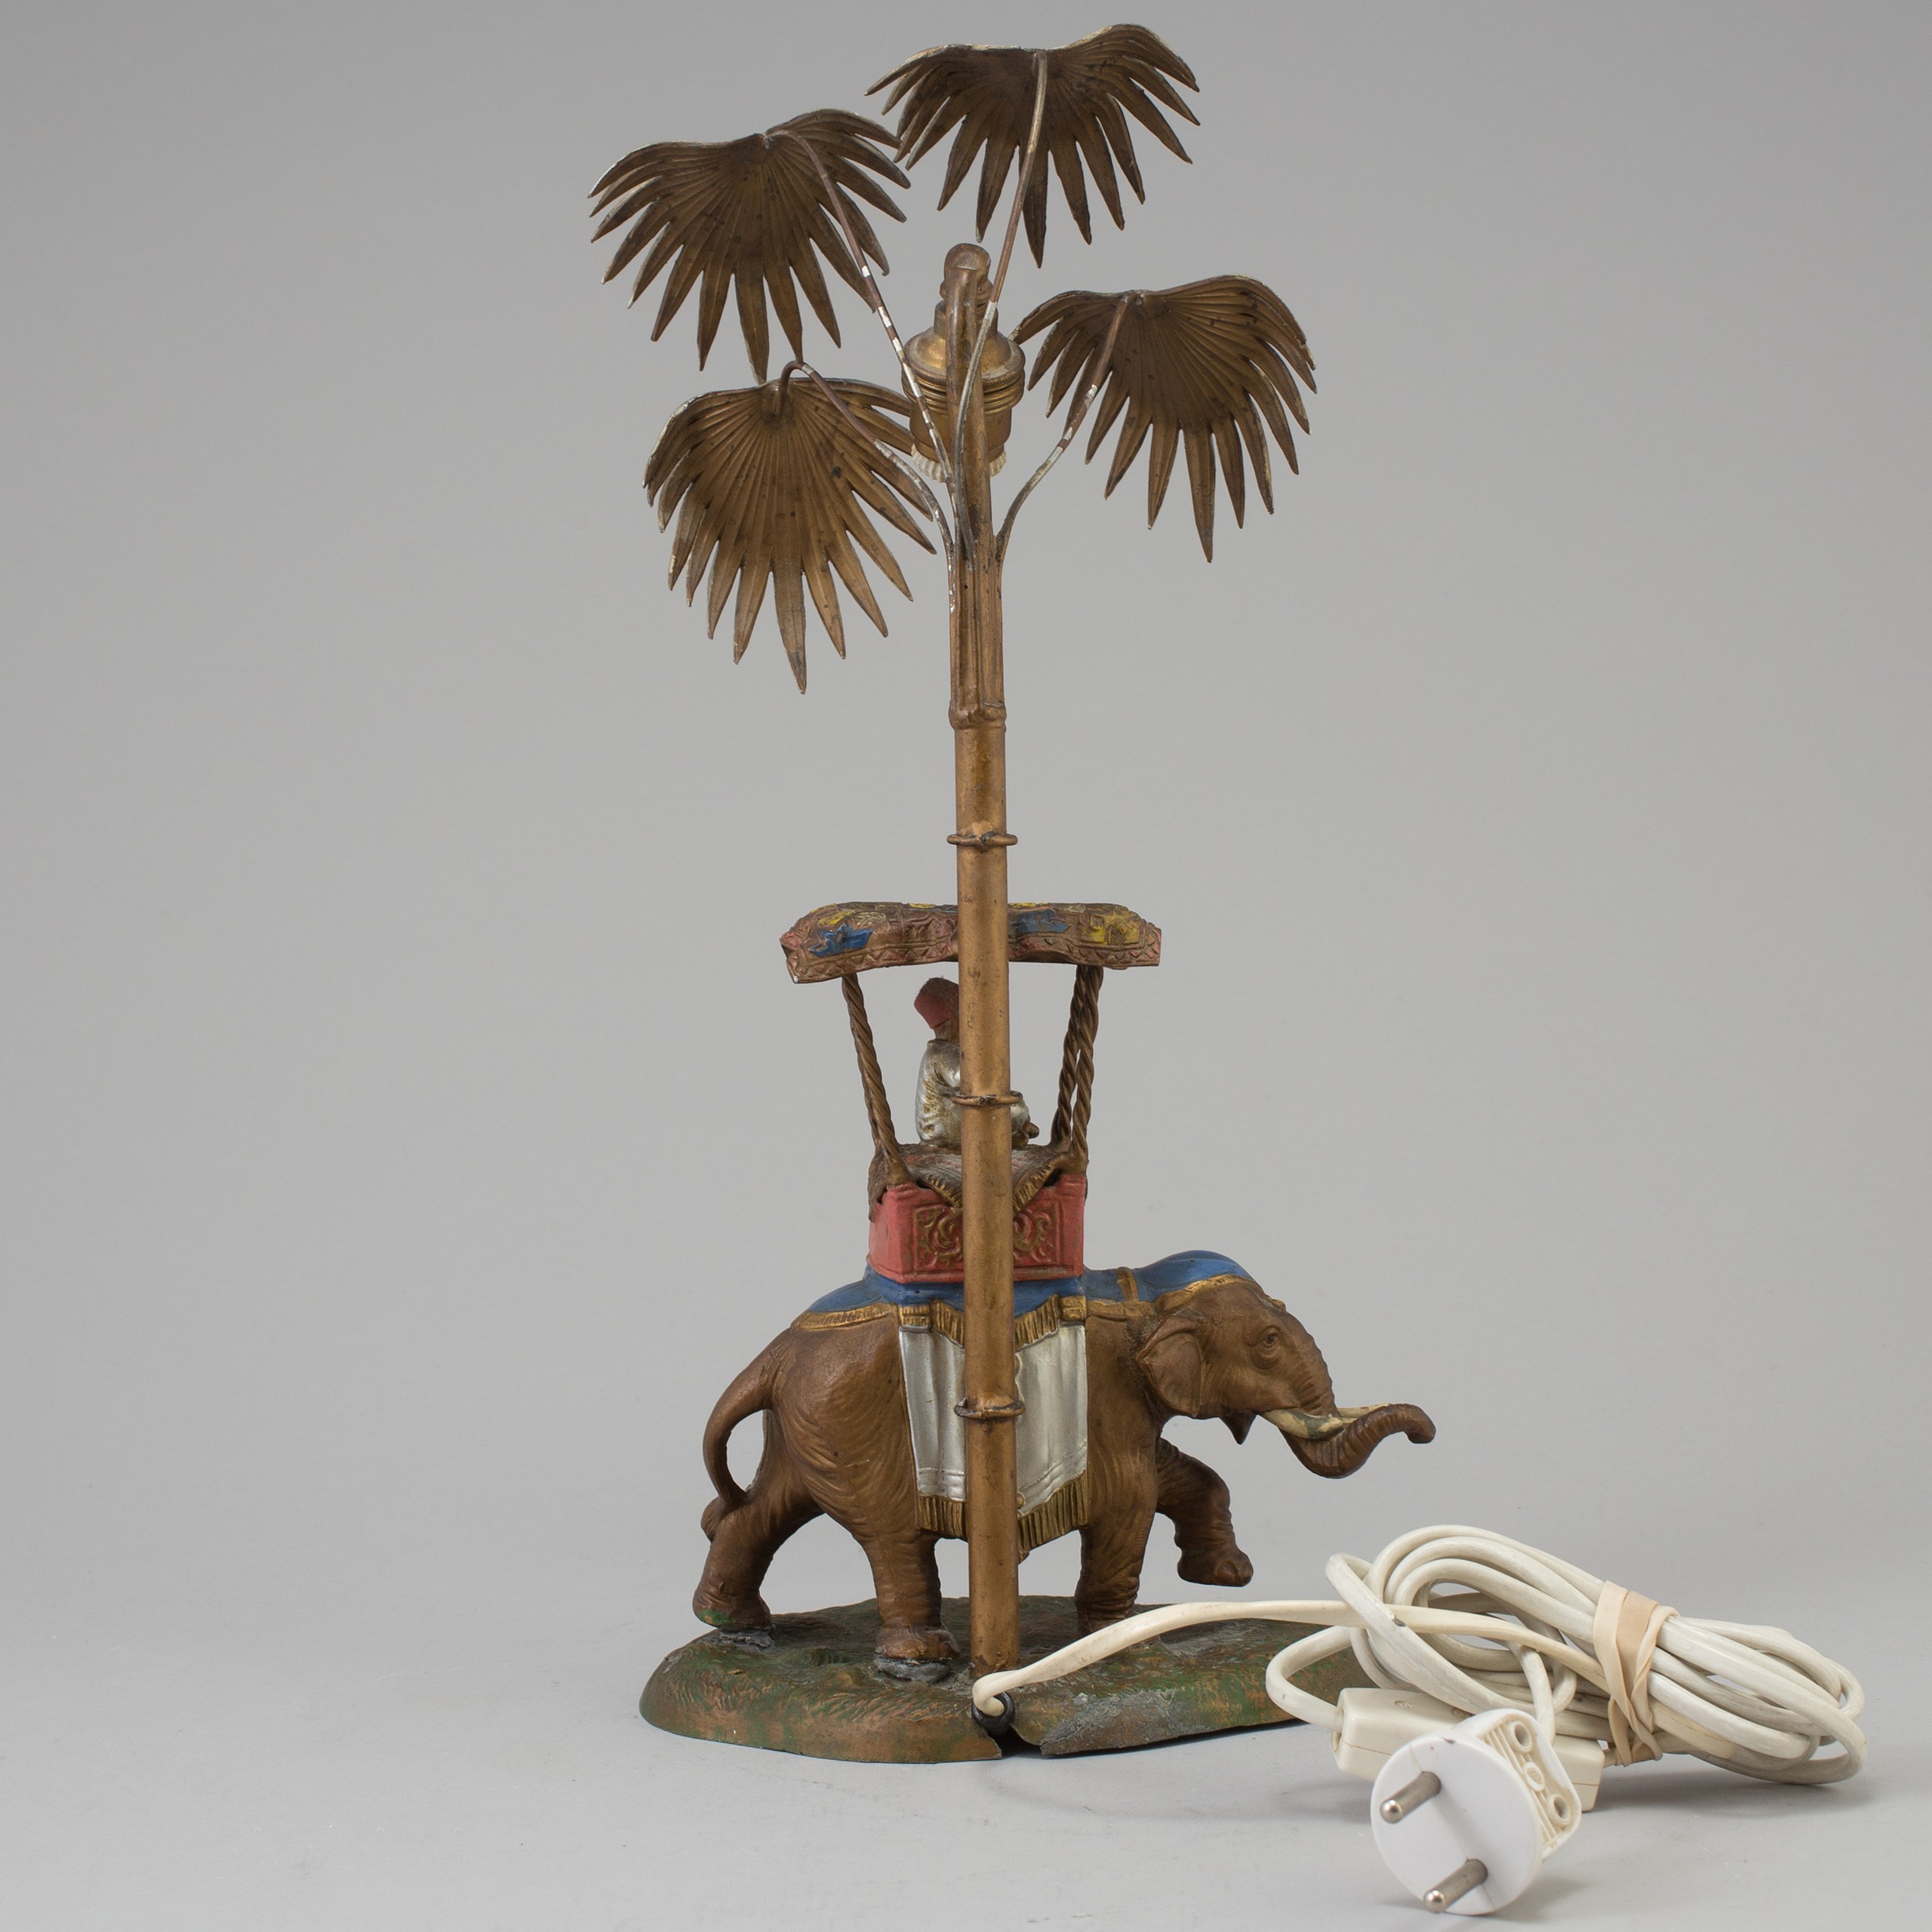 An early 20th century colonial style table lamp bukowskis 1